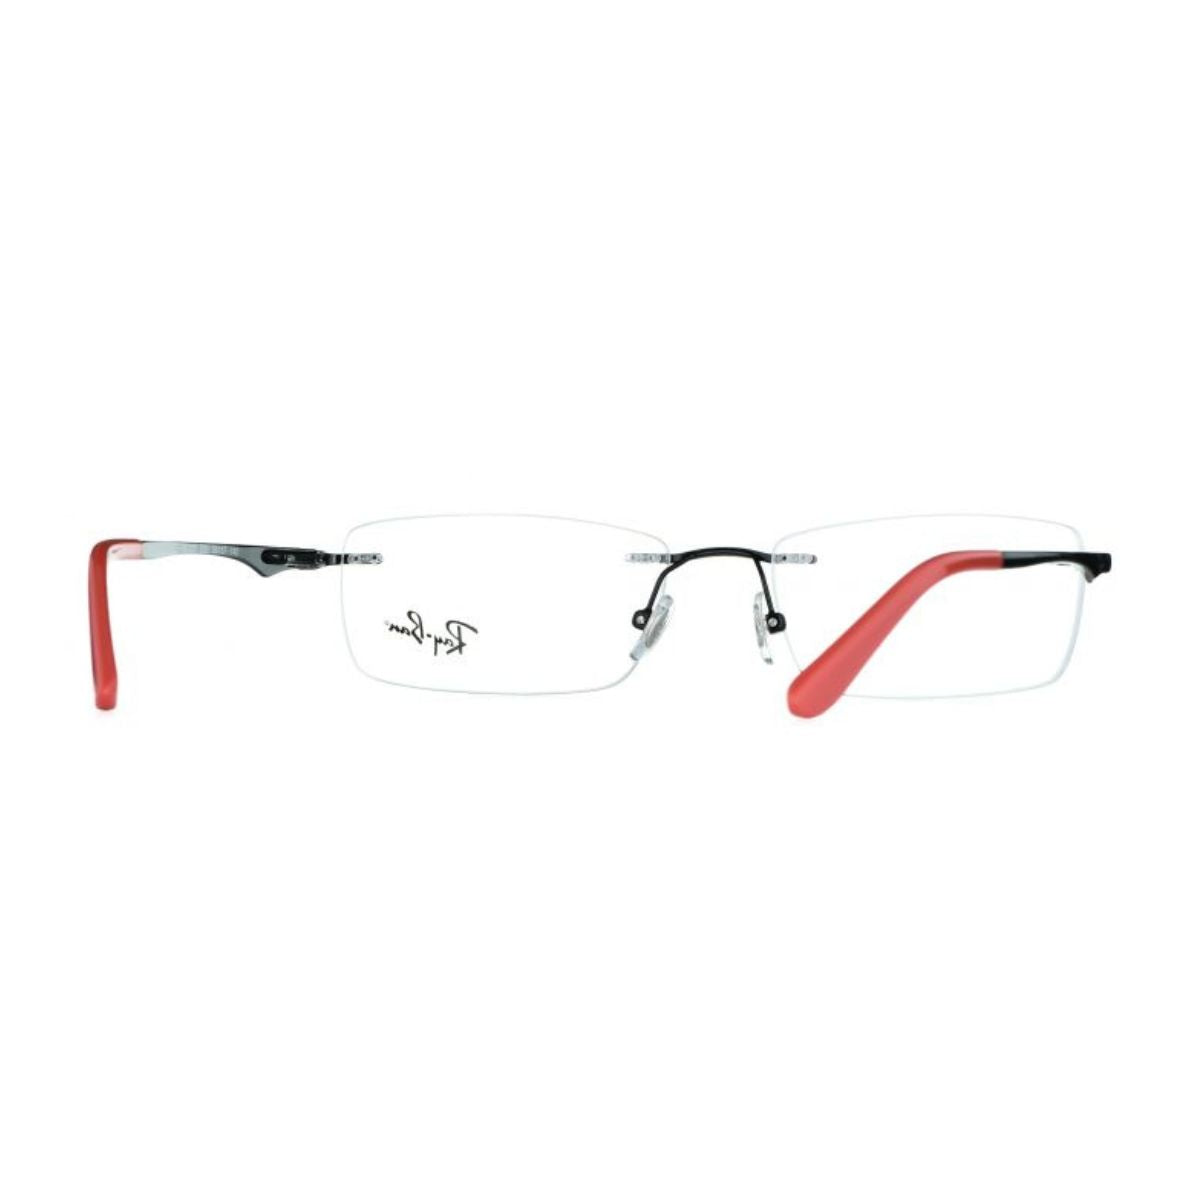 "Rayban 6303I 2509 optical frame for men and women at optorium"